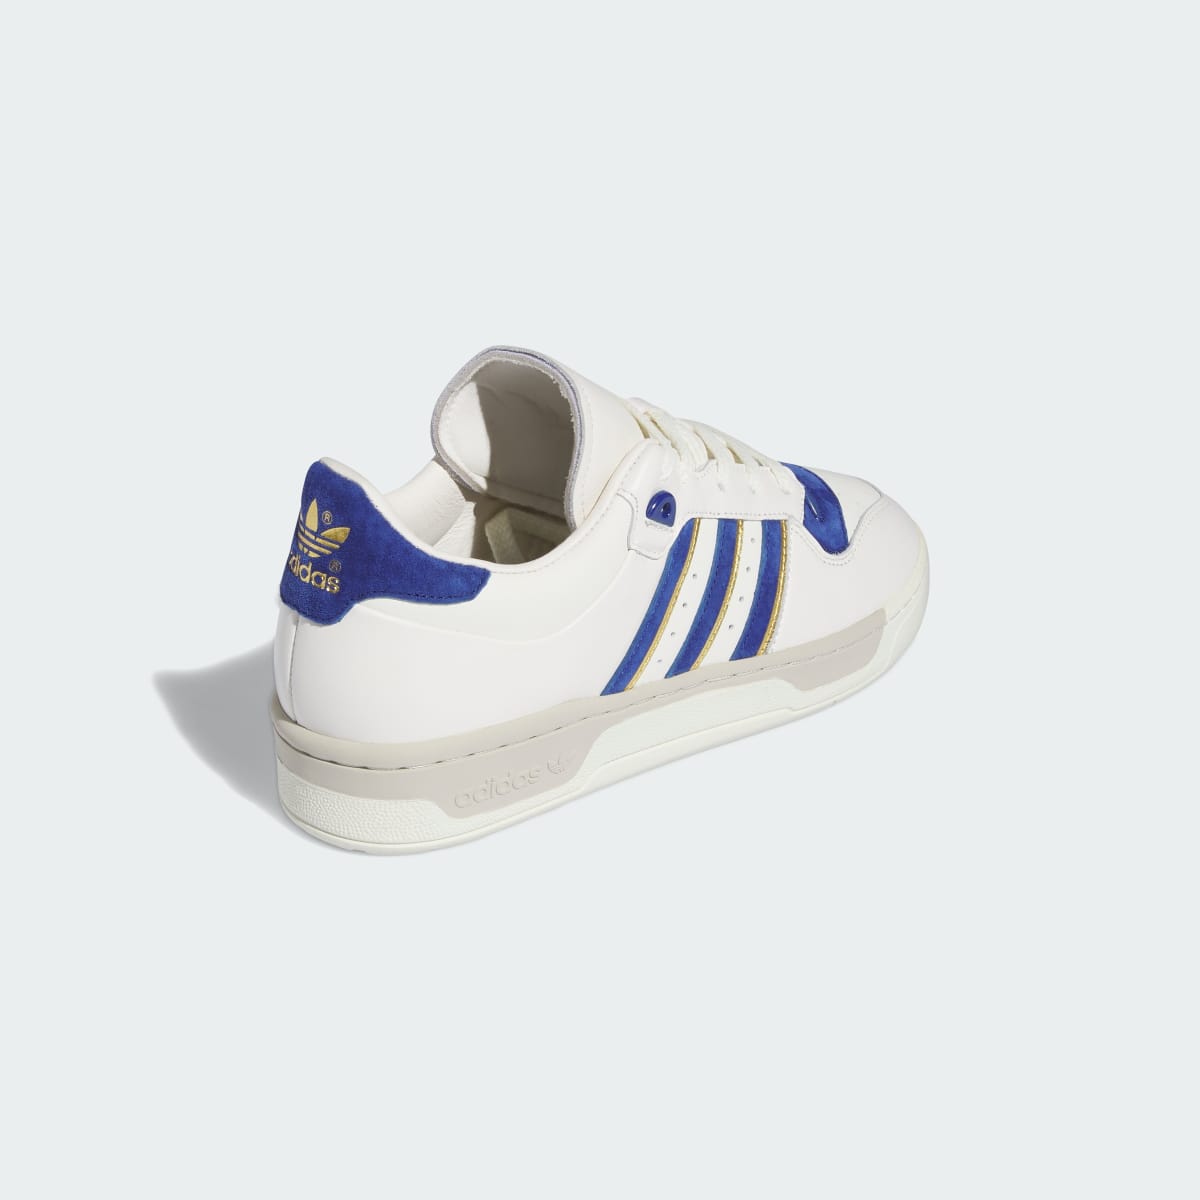 Adidas Rivalry 86 Low Schuh. 6